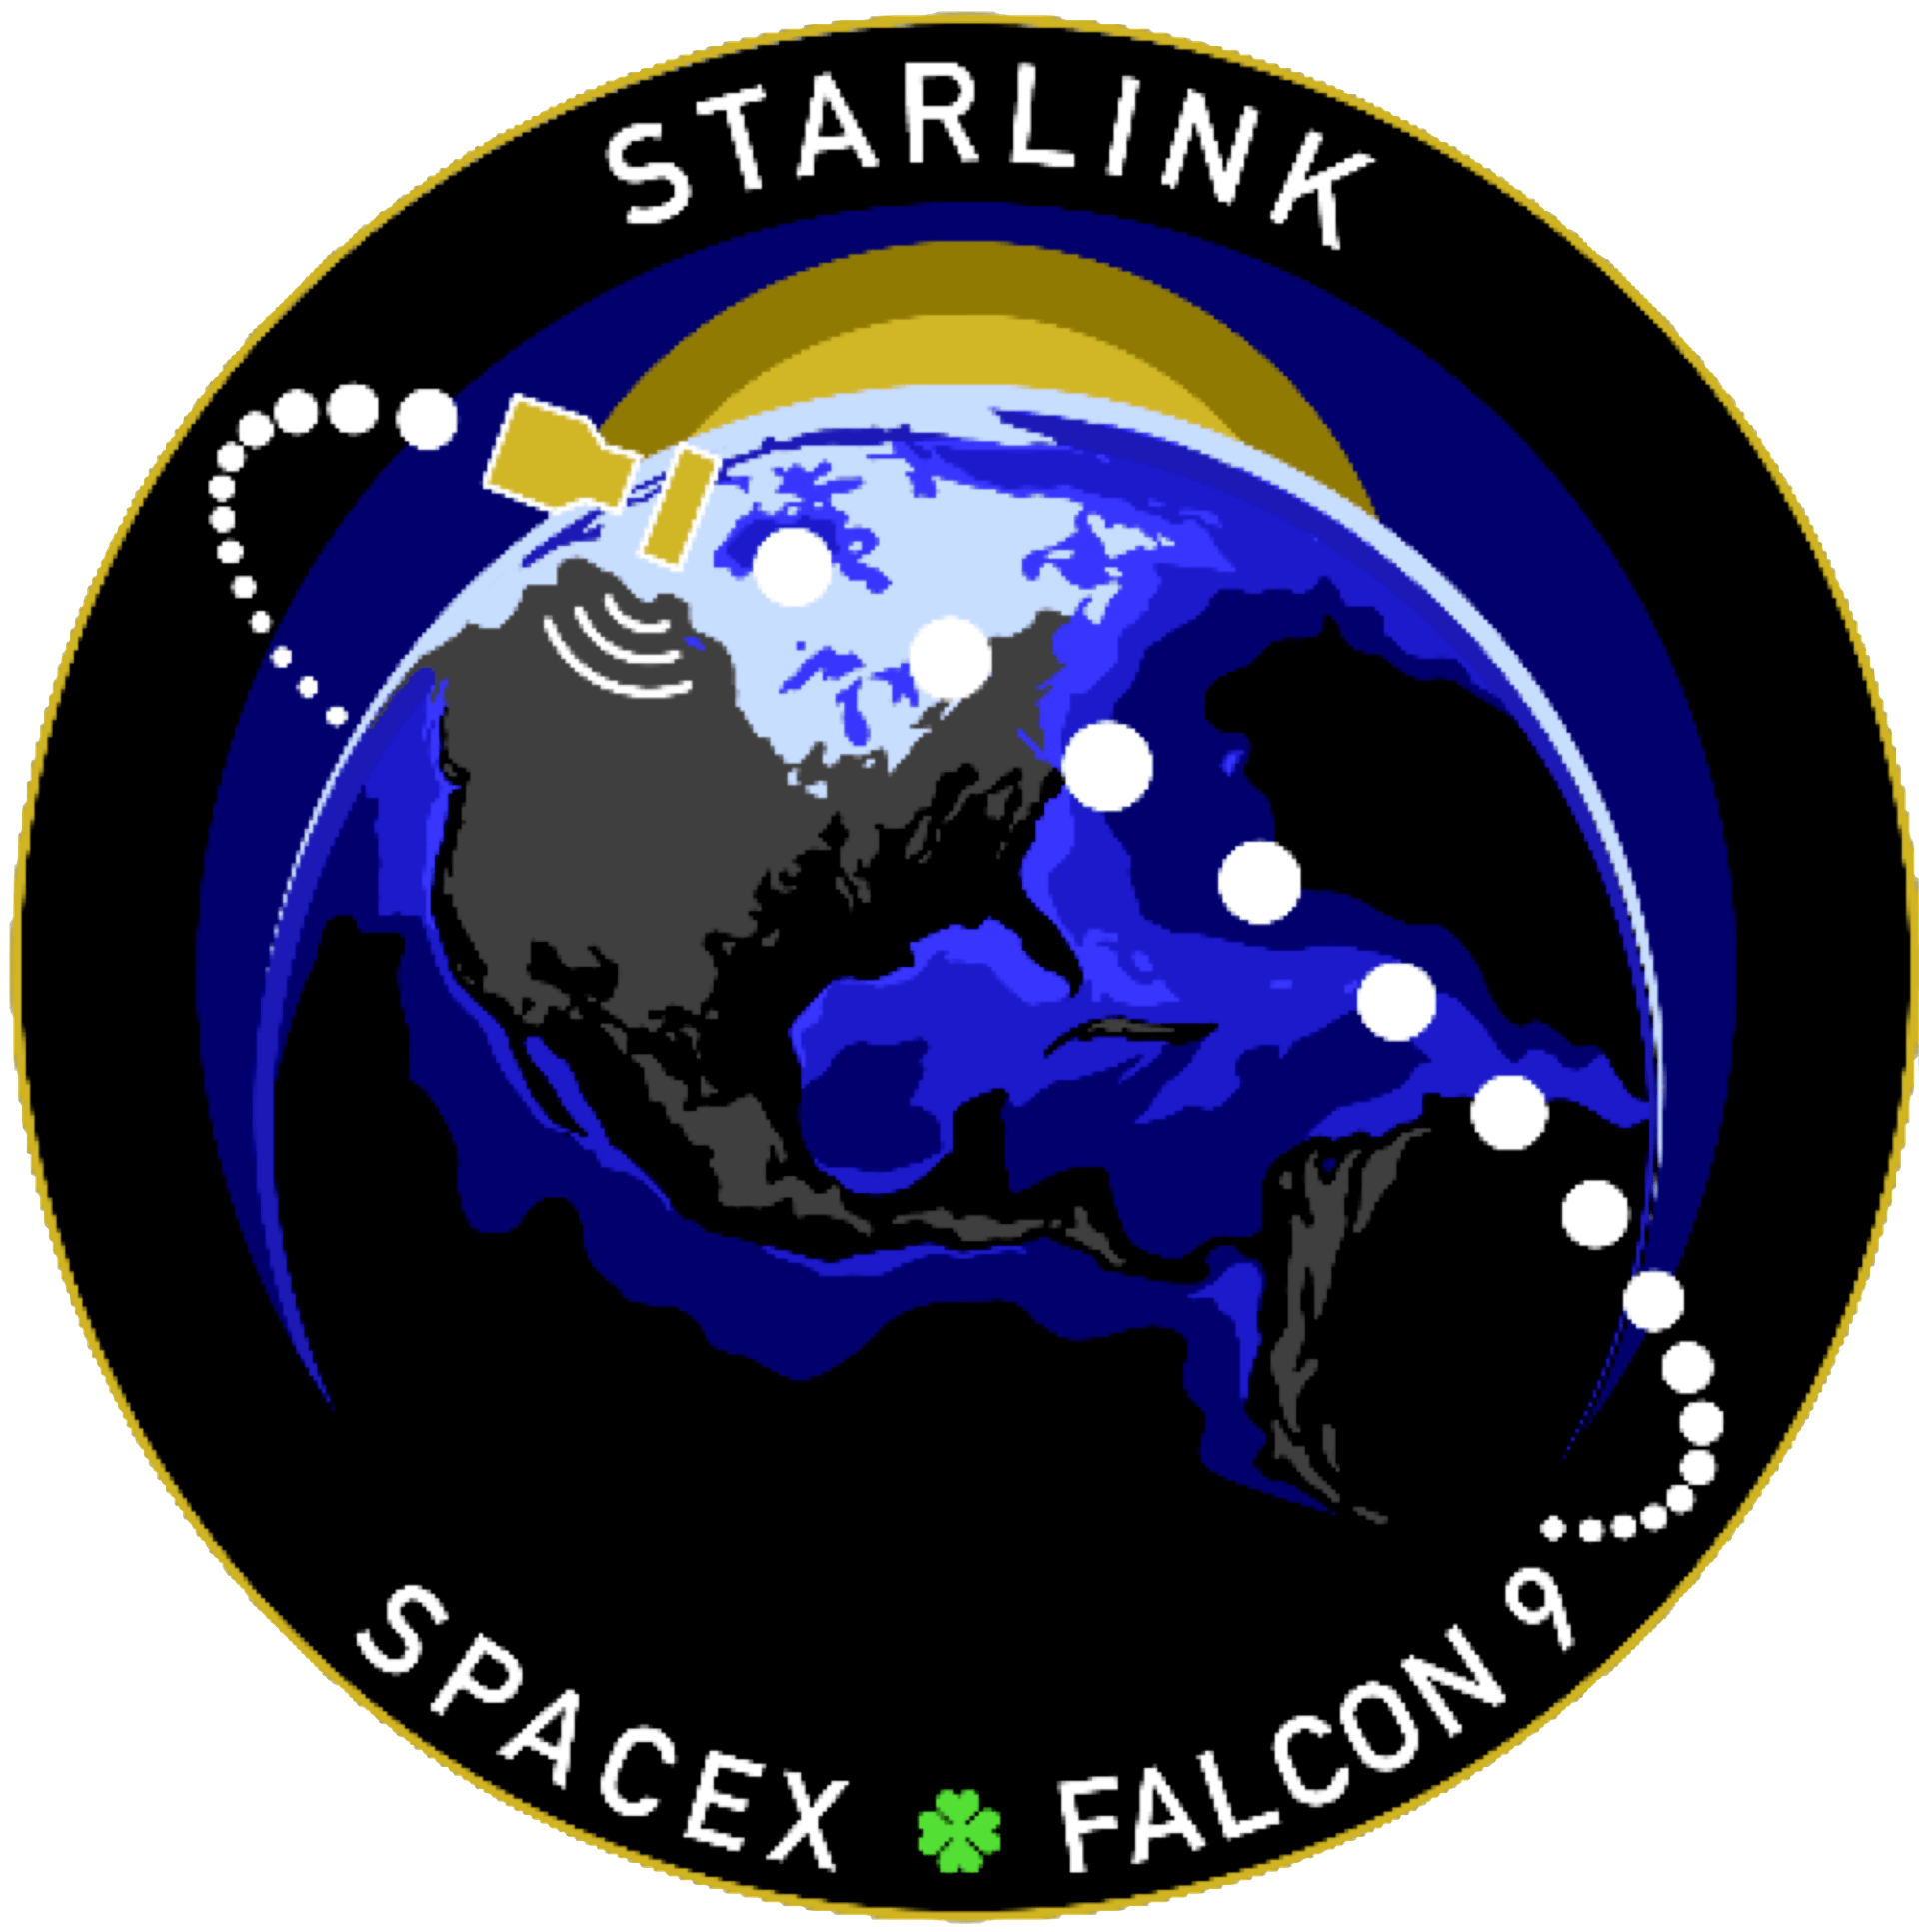 Mission patch for Starlink 21